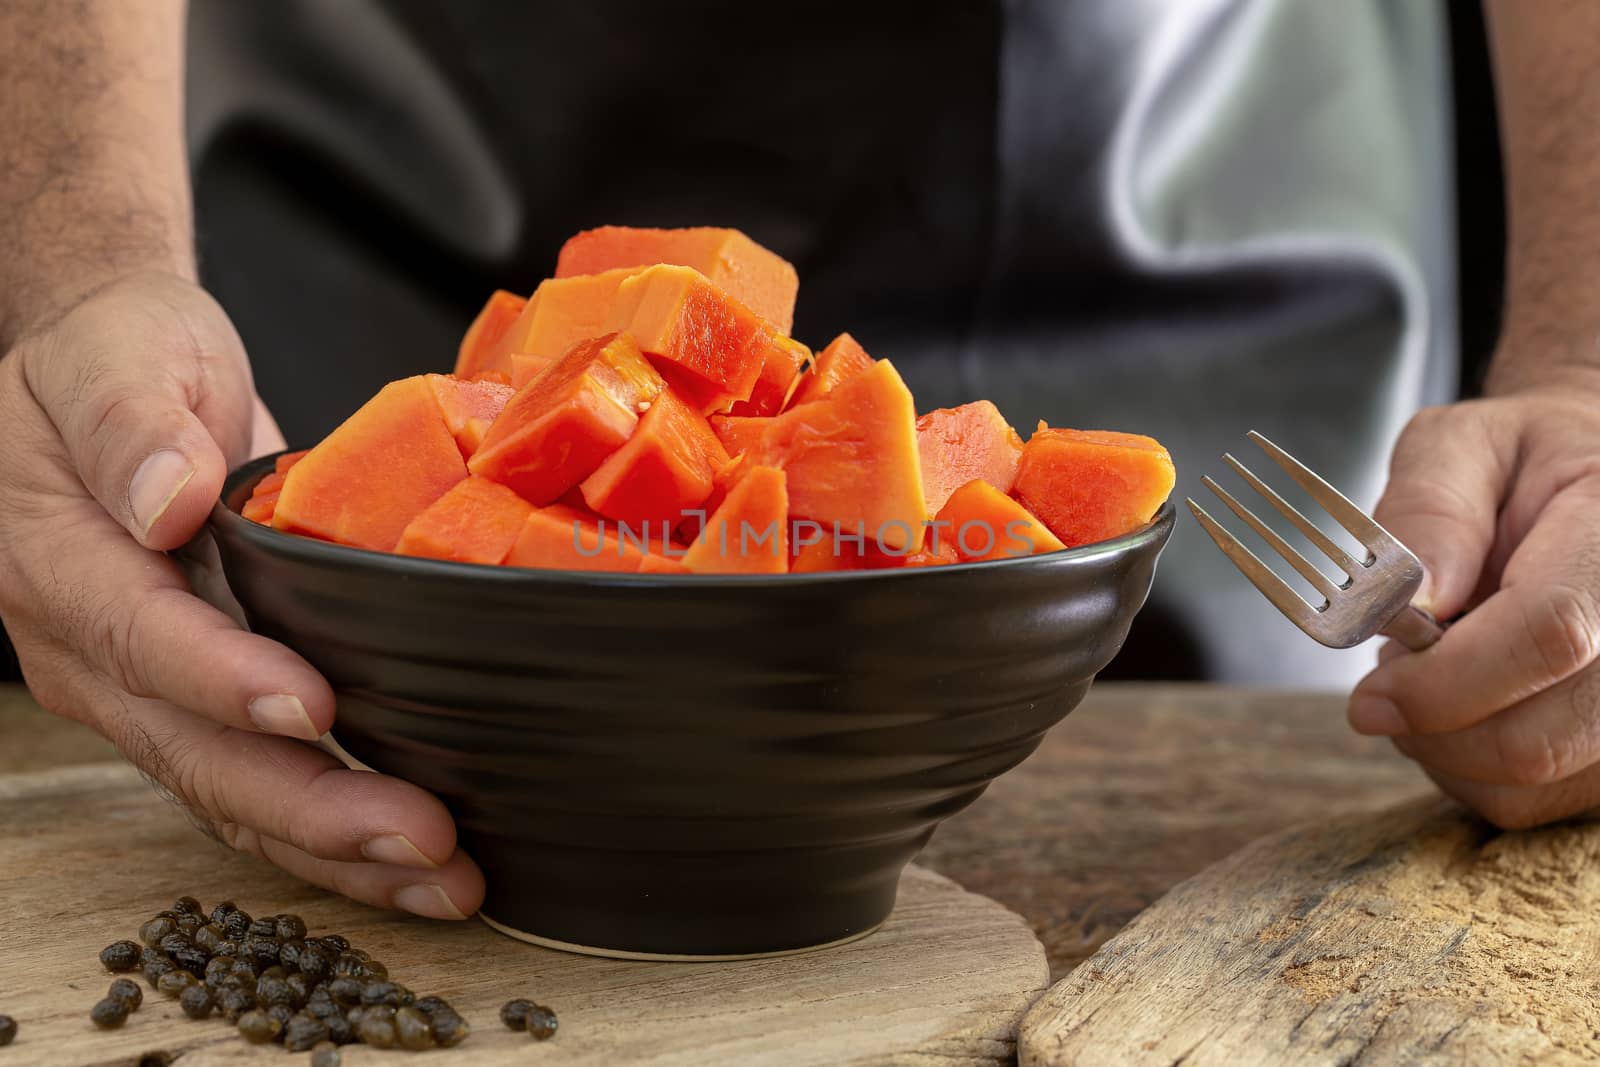 Ripe papaya fruit cut into pieces in a black bowl on wooden background.